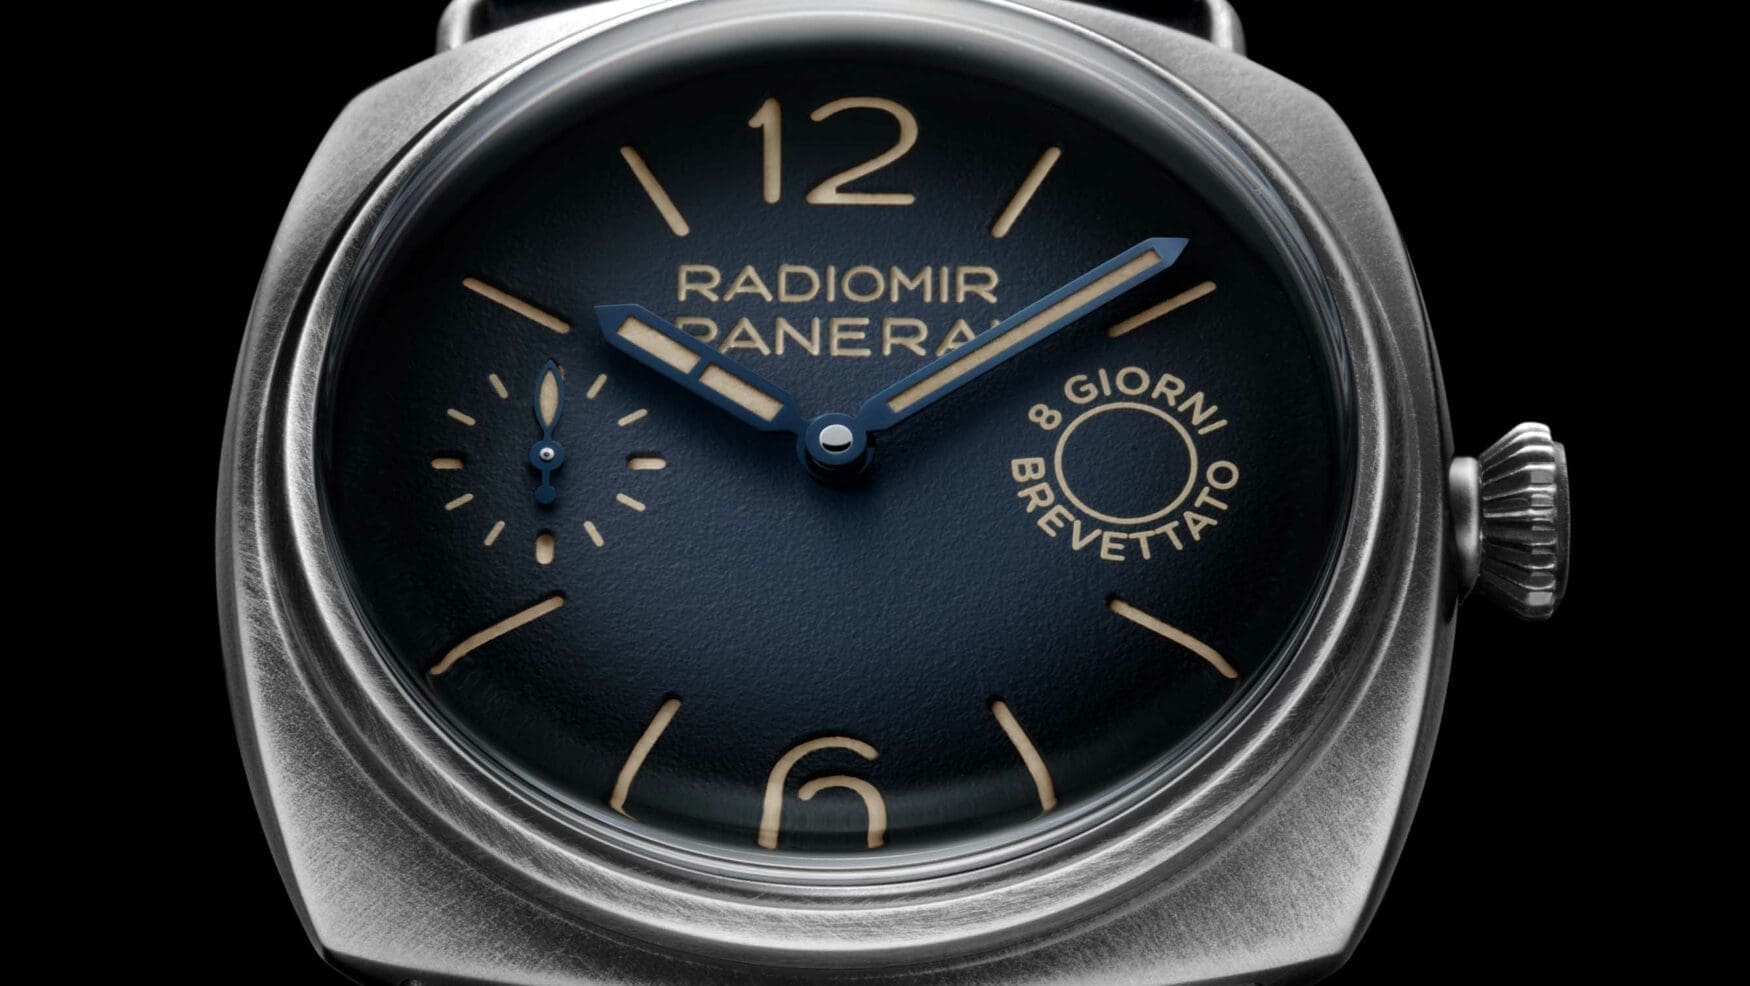 The Panerai Radiomir Otto Giorni is a prototype-inspired novelty